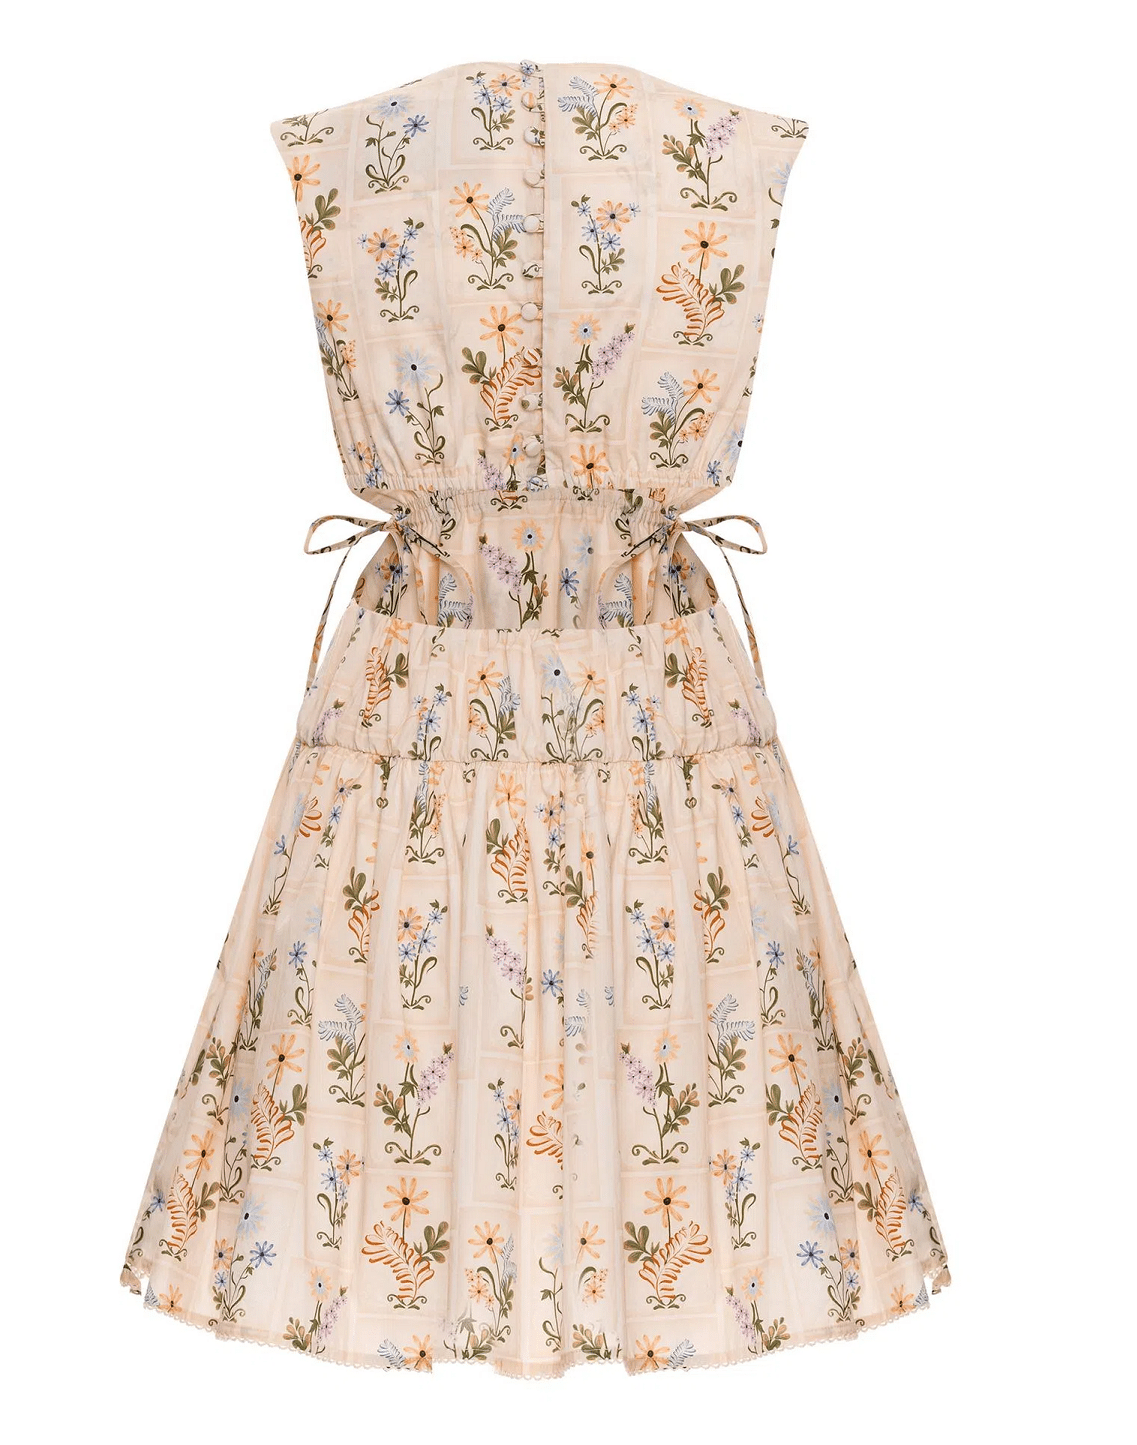 Floral Dress with Button Back Fastening